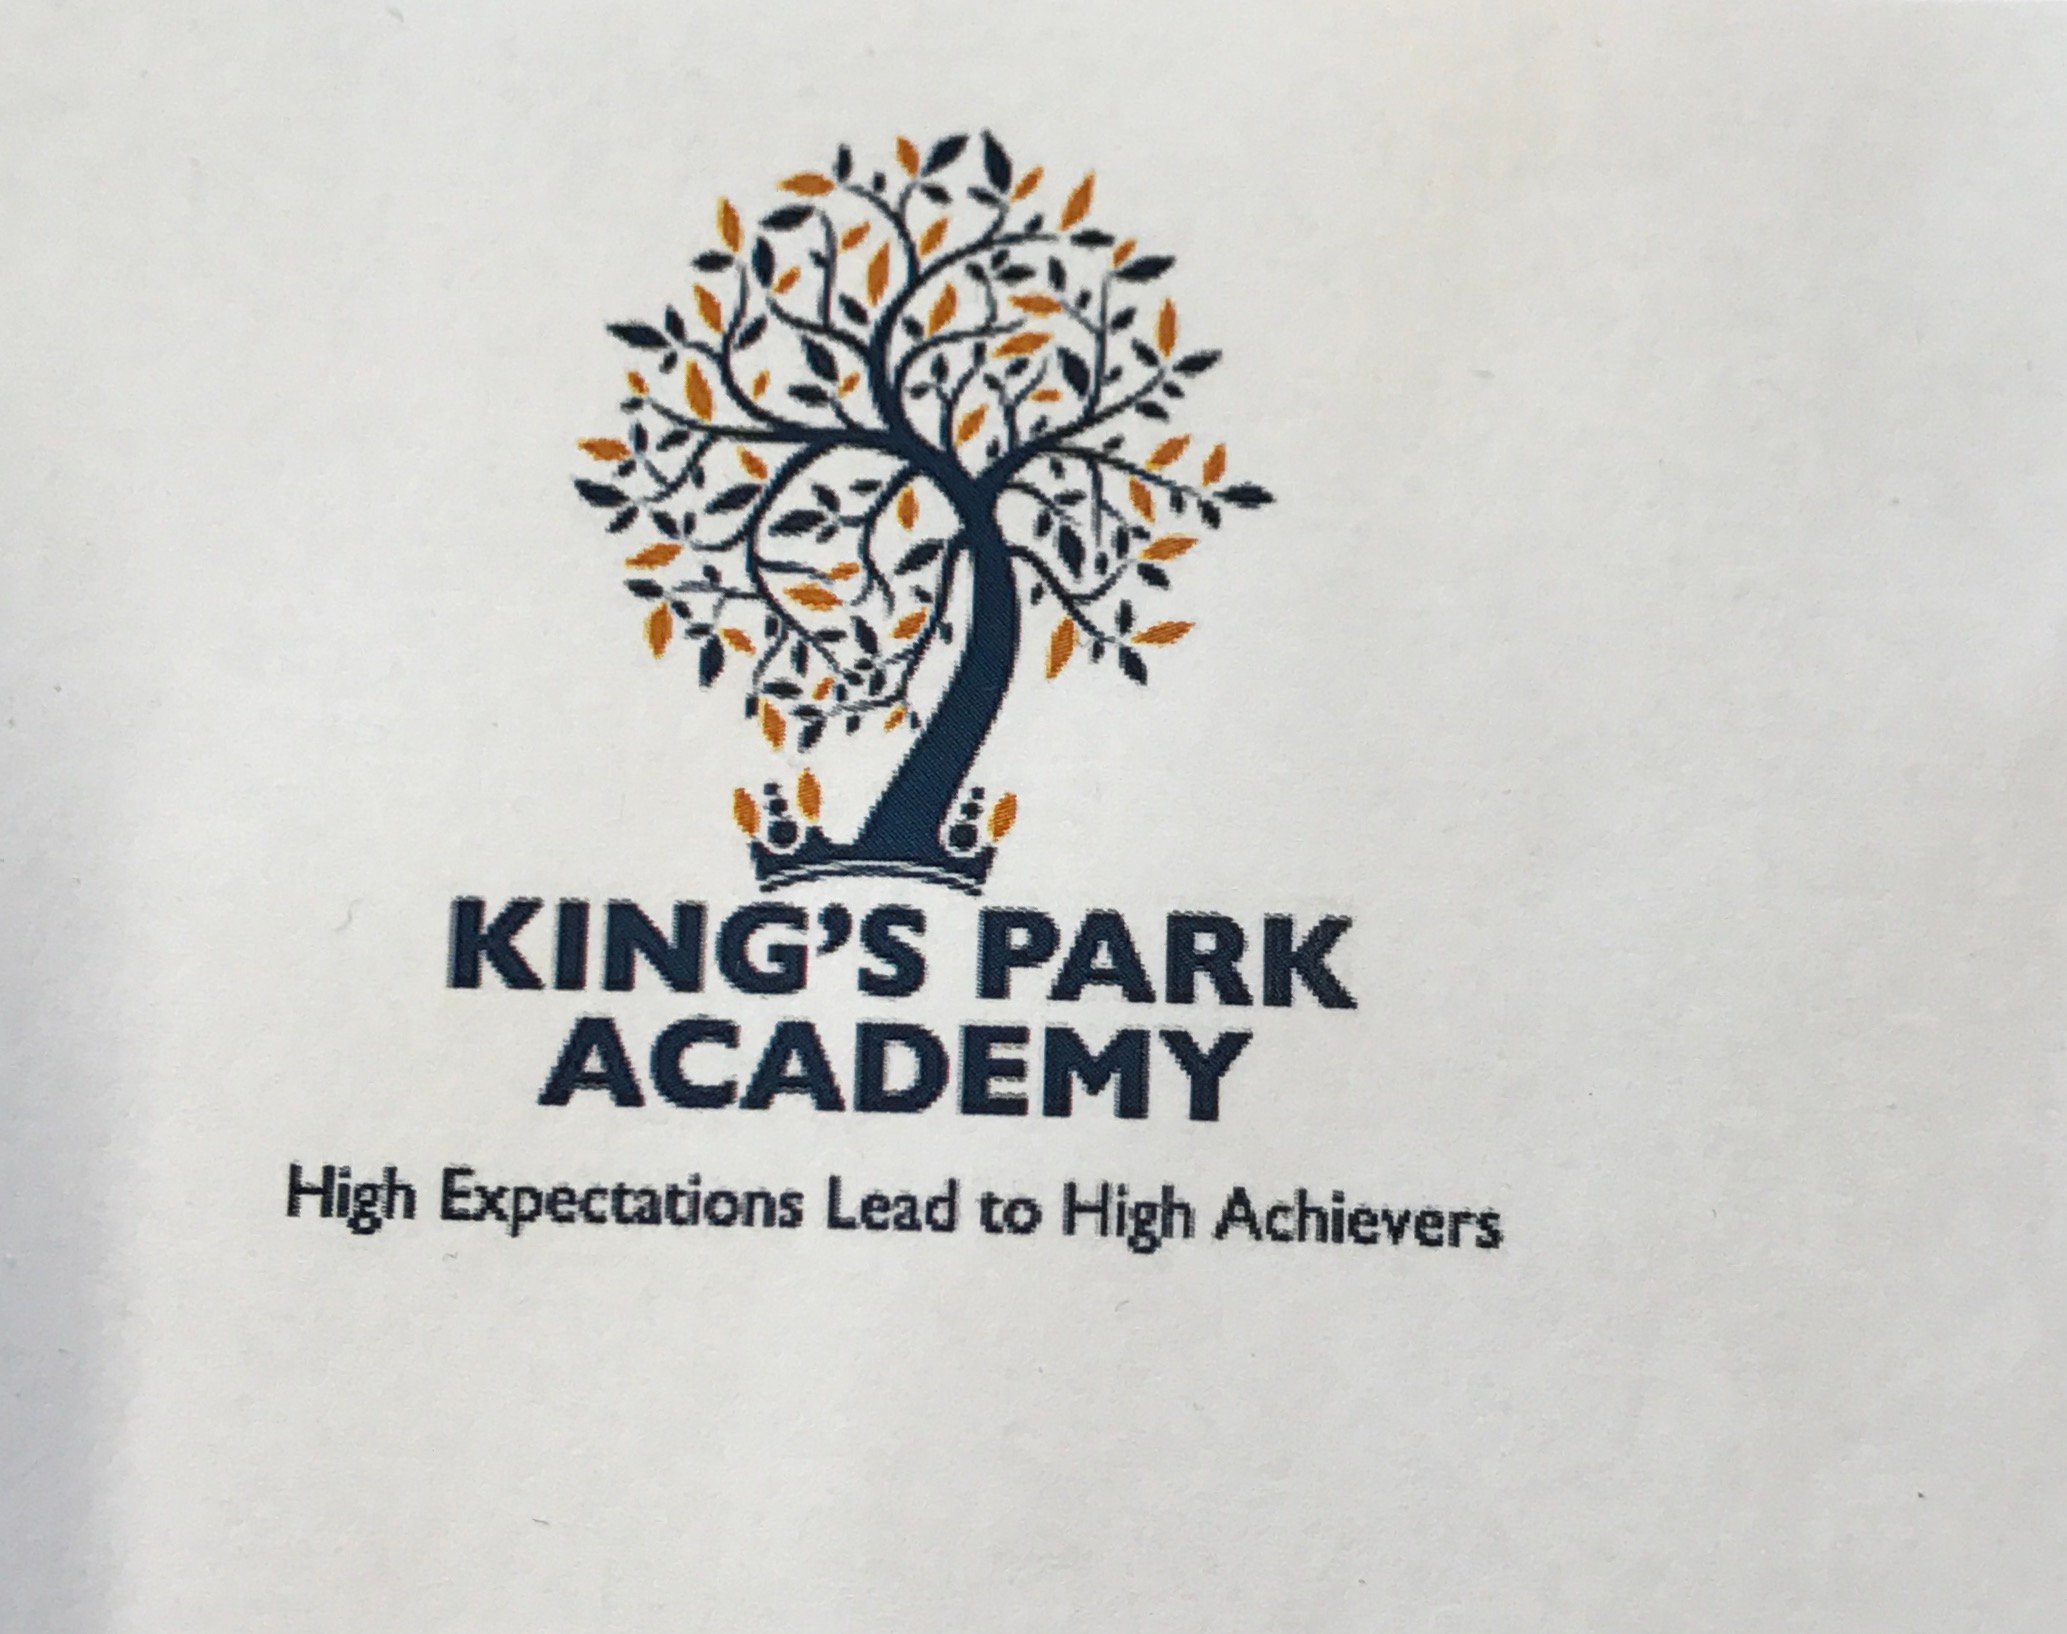 King's Park Academy is part of Ambitions Academies Trust